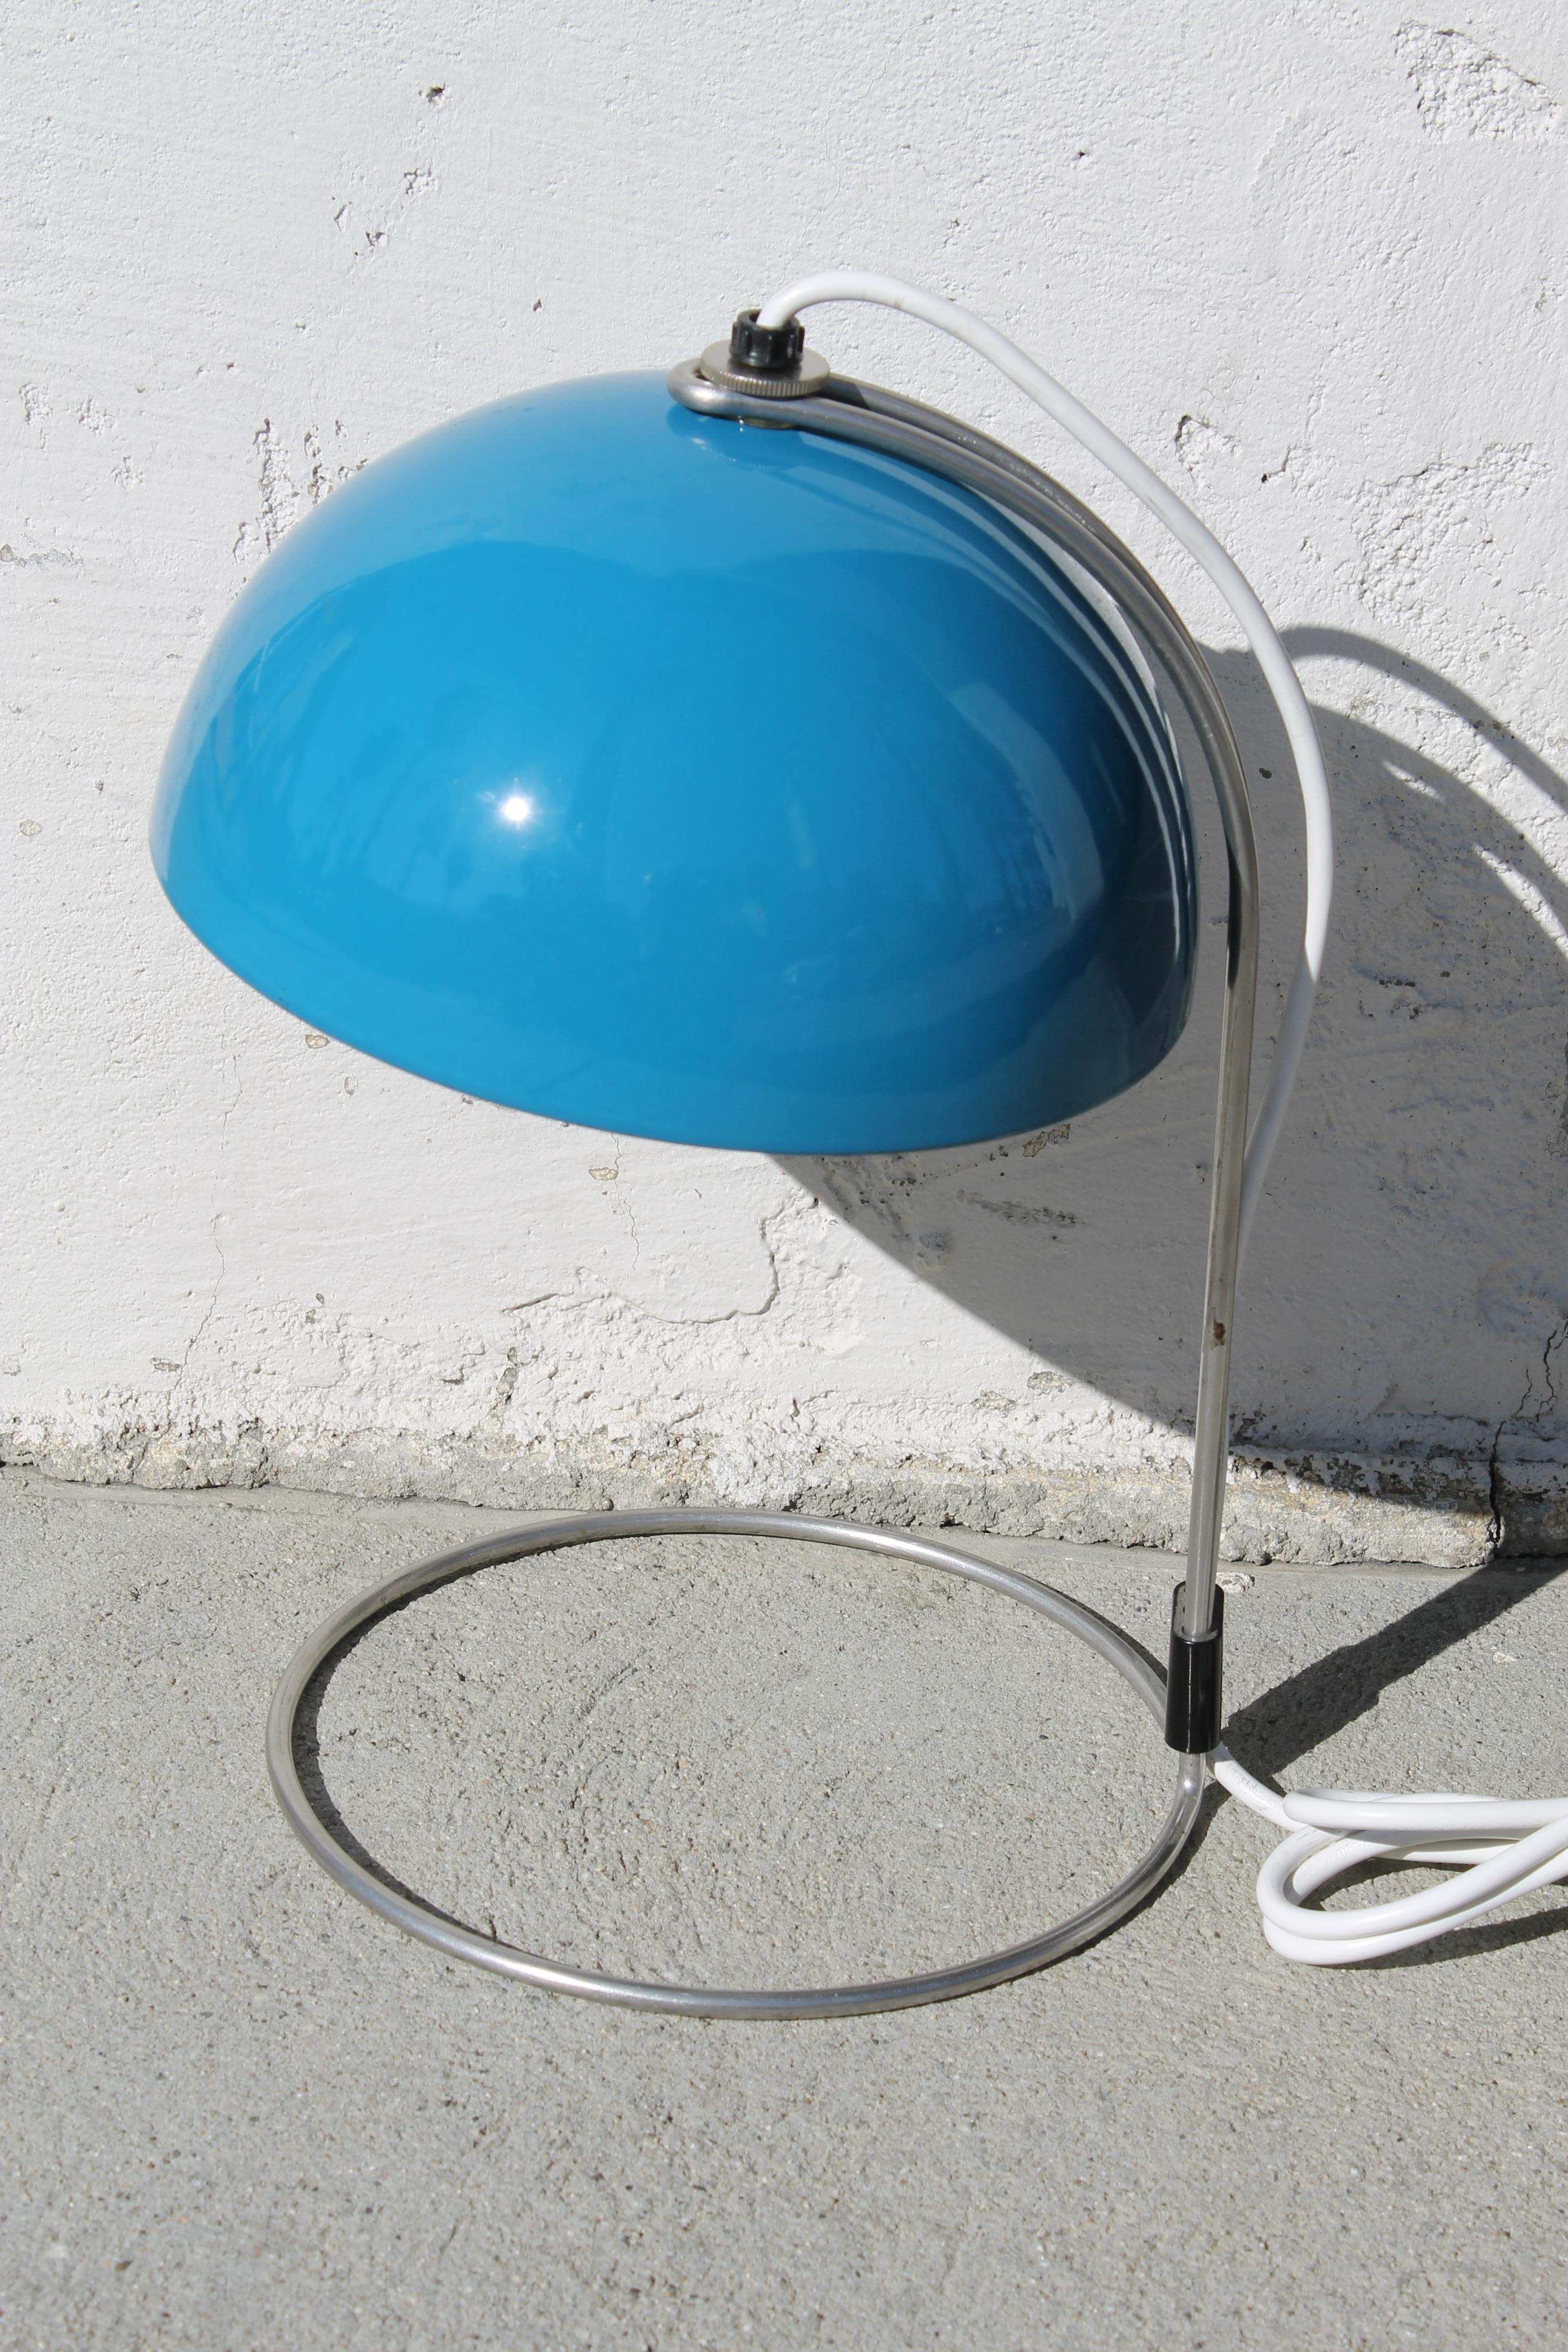 Verner Panton blue VP4 flower pot lamp for Louis Poulsen & Co. Small enamel cup covering the bulb to reflect the light and keeping direct light out of eye. Lamp measures 13